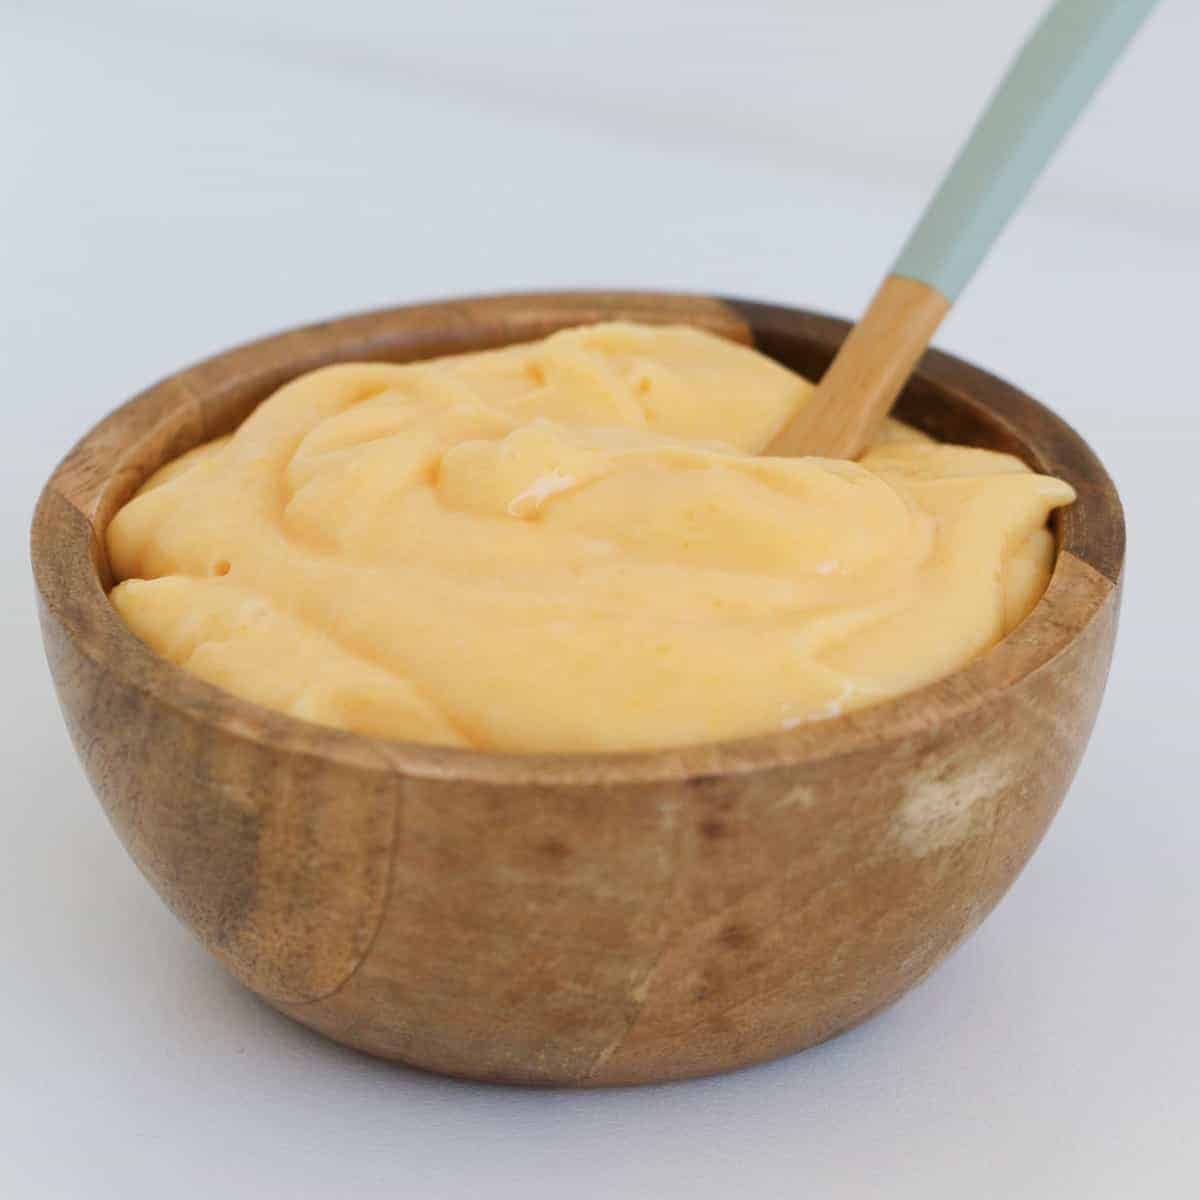 A spoon in a wooden bowl filled with creamy yellow lemon curd.